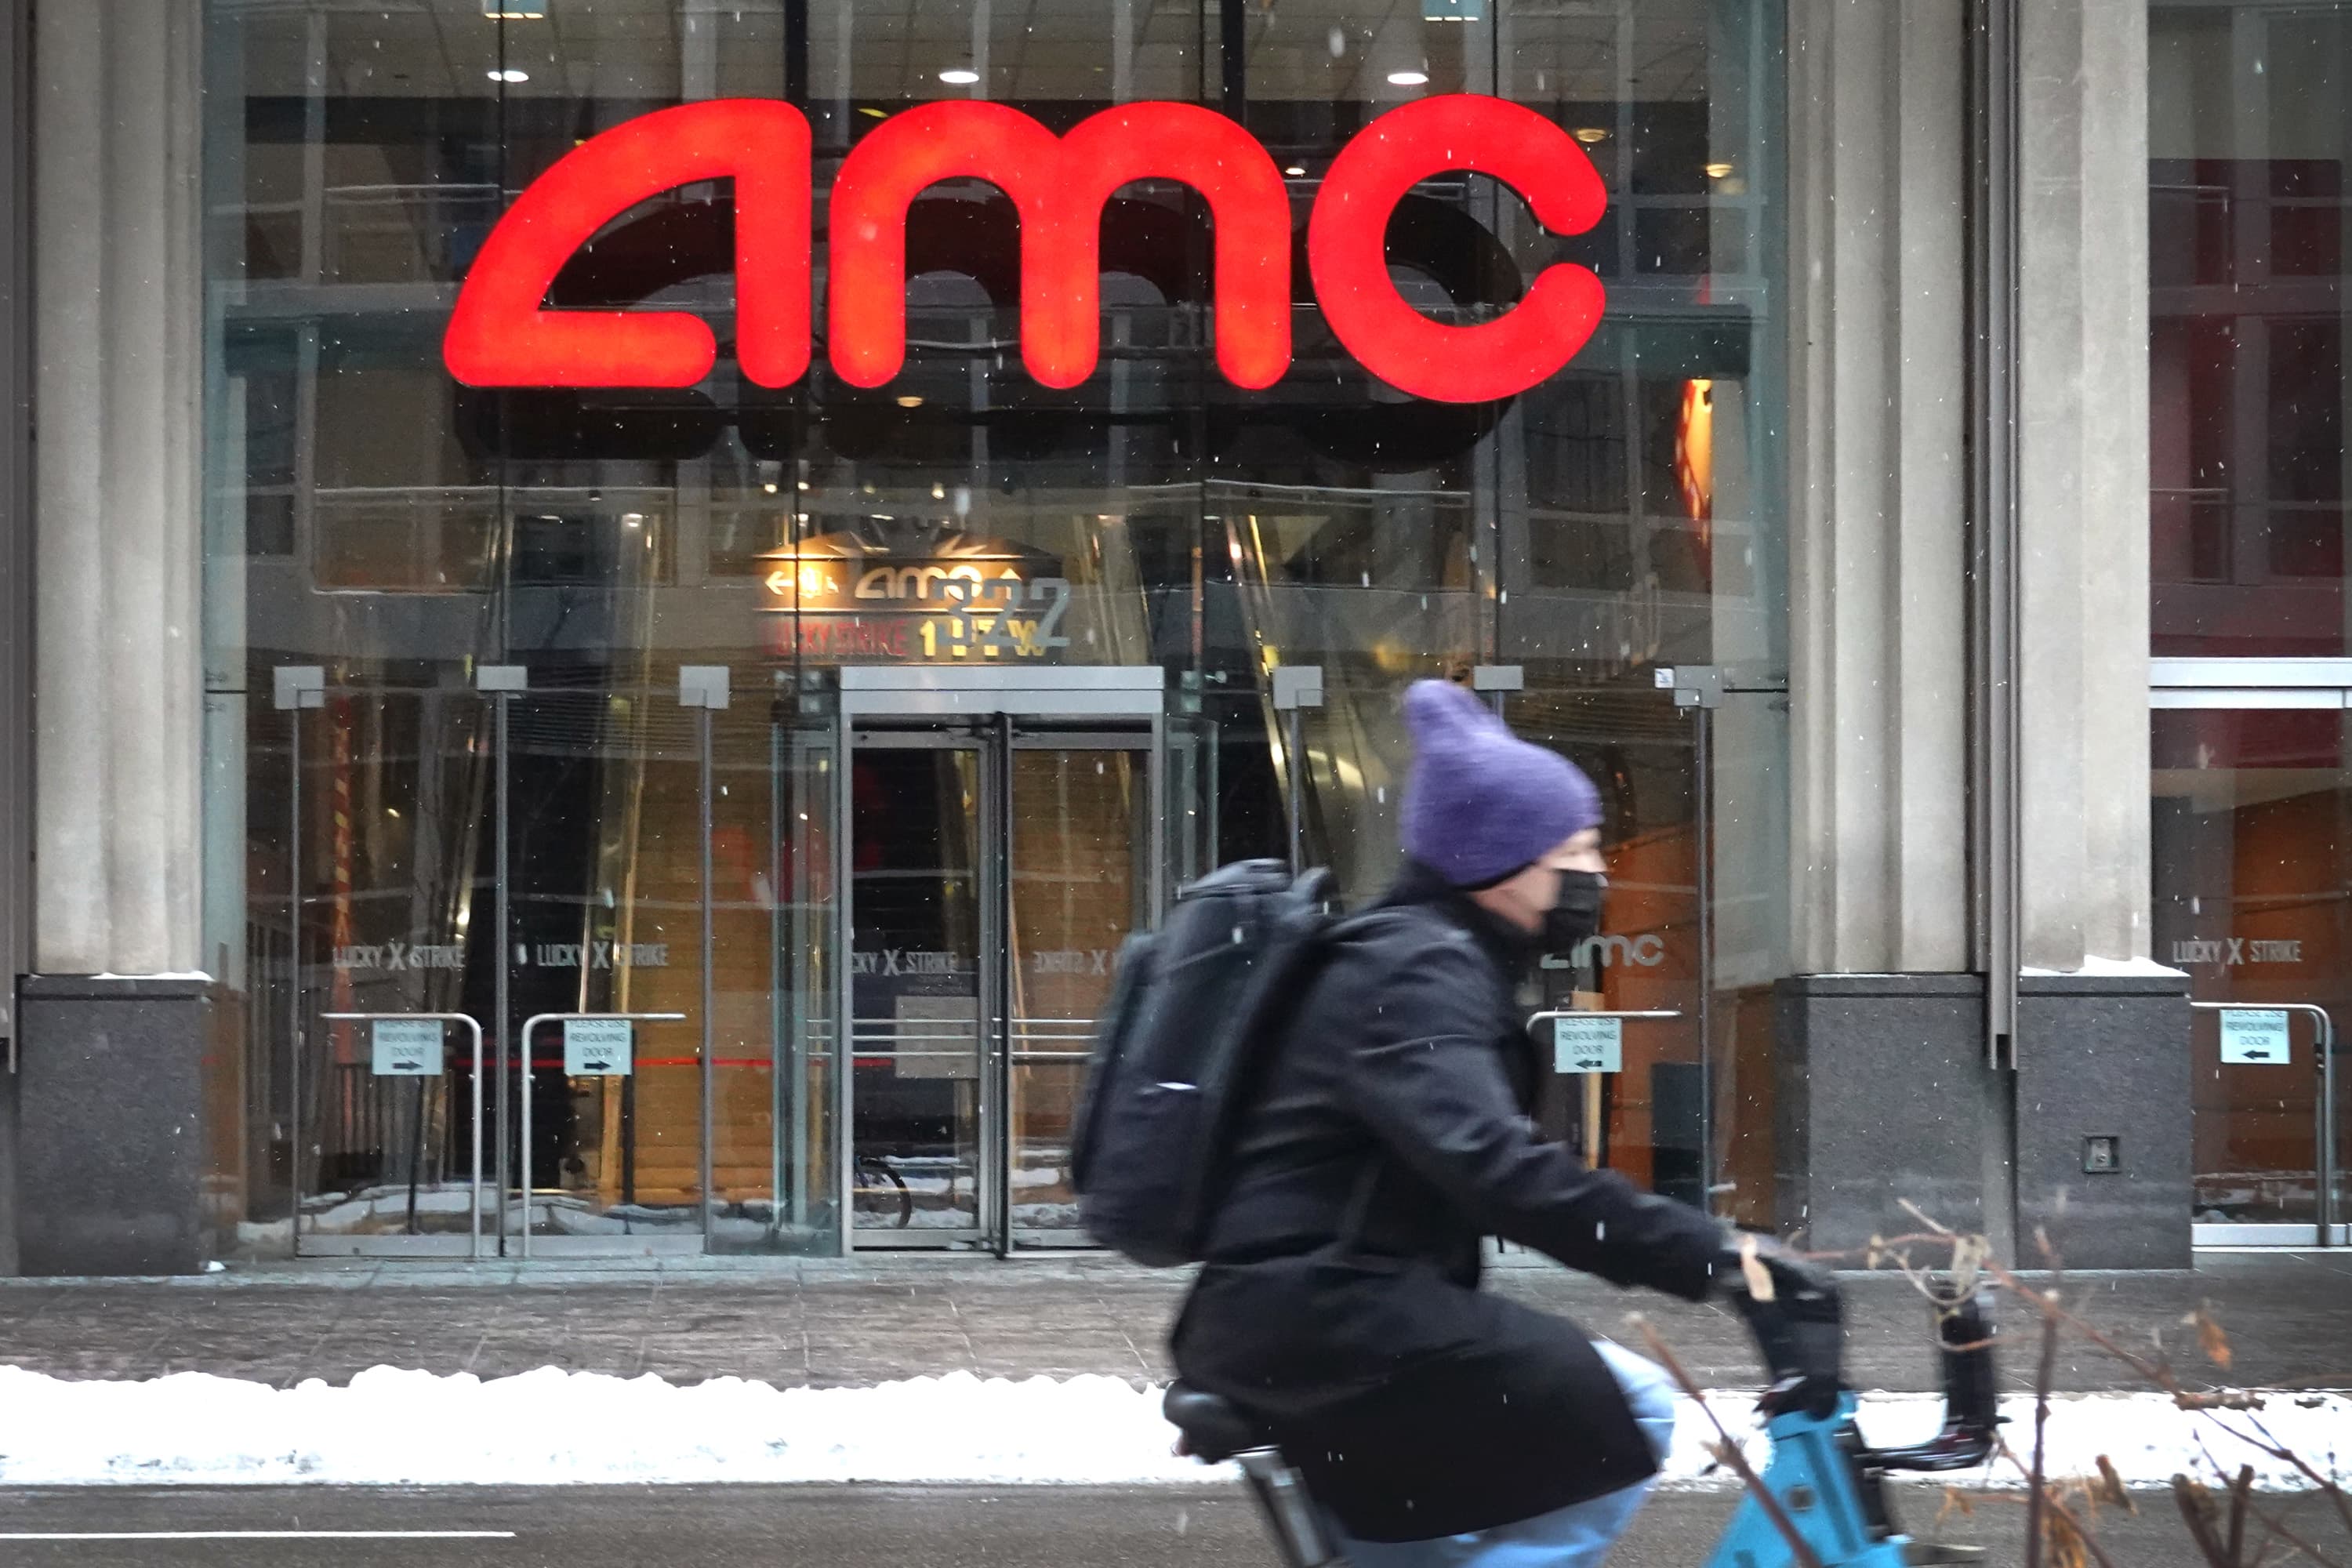 Reddit trades besides GameStop also crater – AMC, silver takes big hits